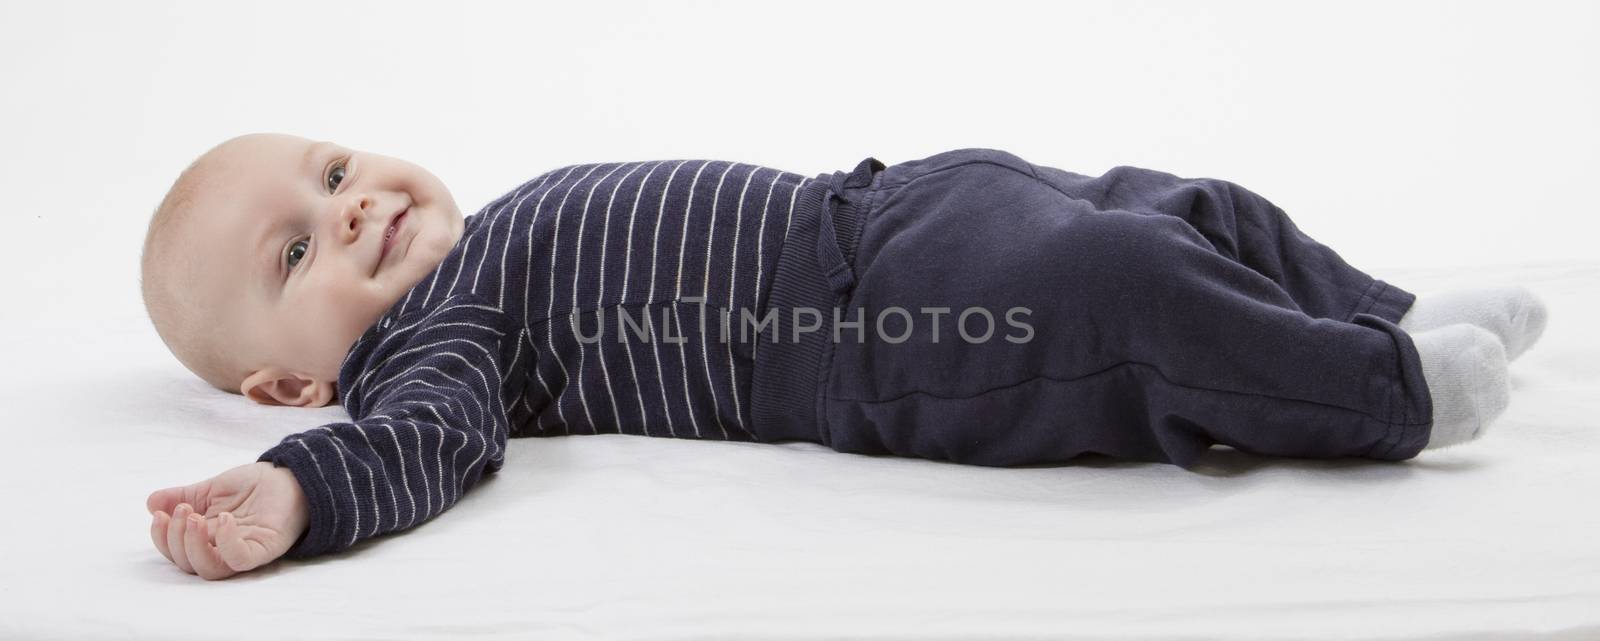 smiling toddler in blue clothing laying down. vertical image